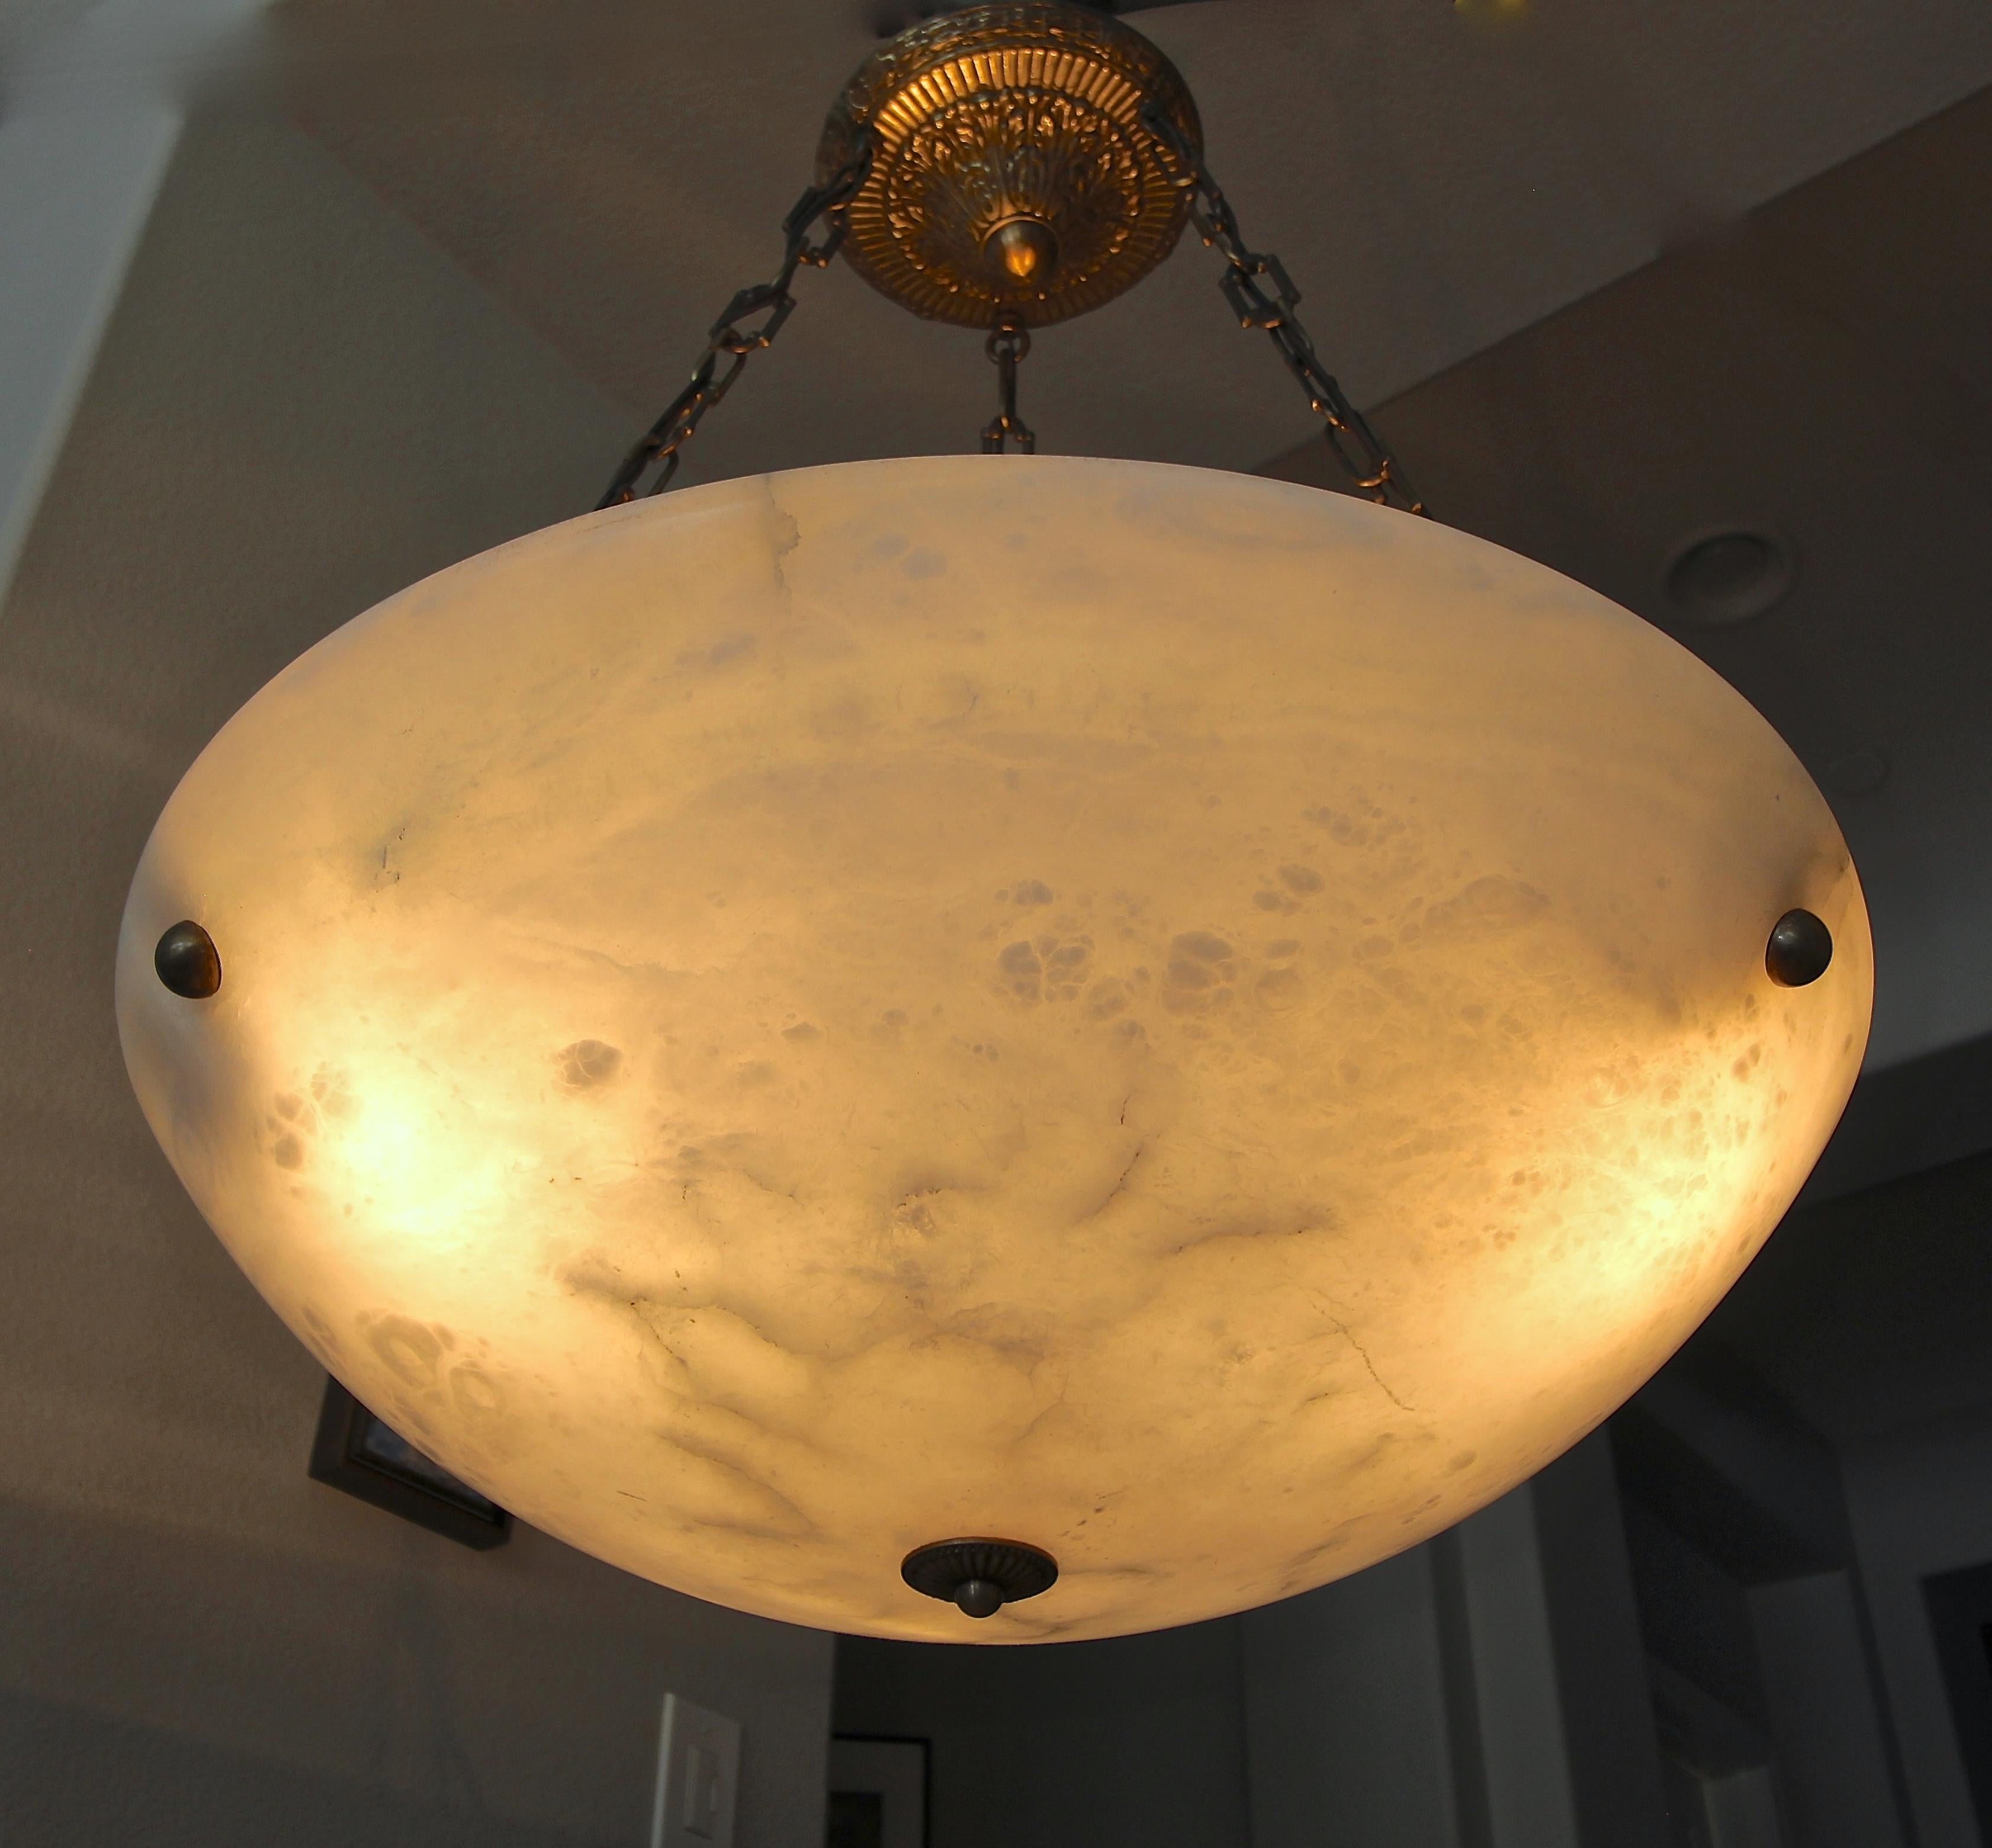 Very large scale alabaster pendant light or chandelier with aged patinated brass fittings in the Directoire style. Newly wired for US, fixture uses three regular A base bulbs.

Measures: Alabaster is 24